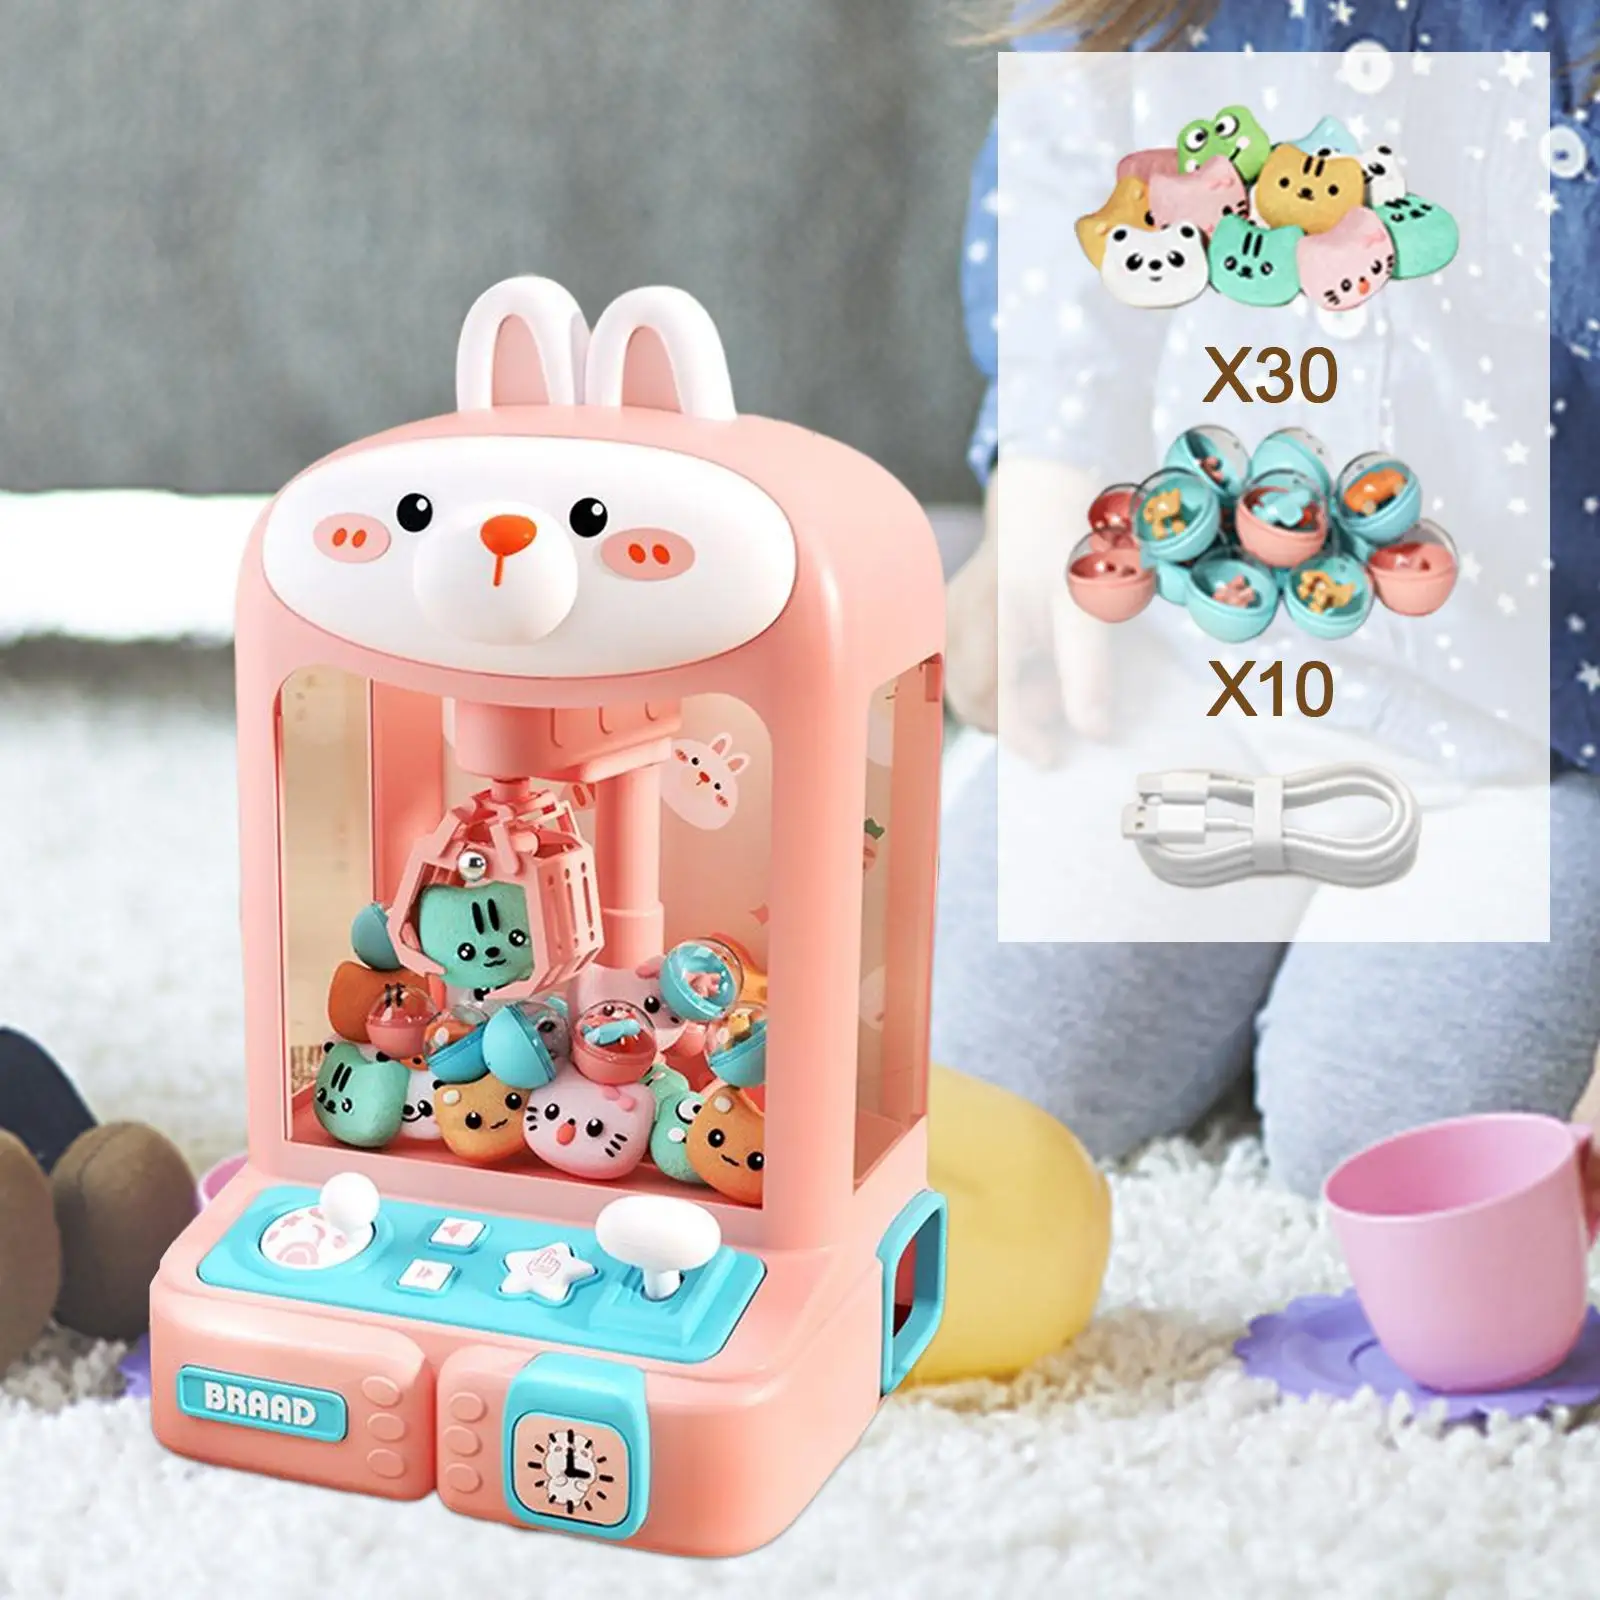 Claw Machine Mini Claw Game Lovely Indoor Toy with Sounds Electronic Small Toys for Kids Boys Girls Party Birthday Gifts